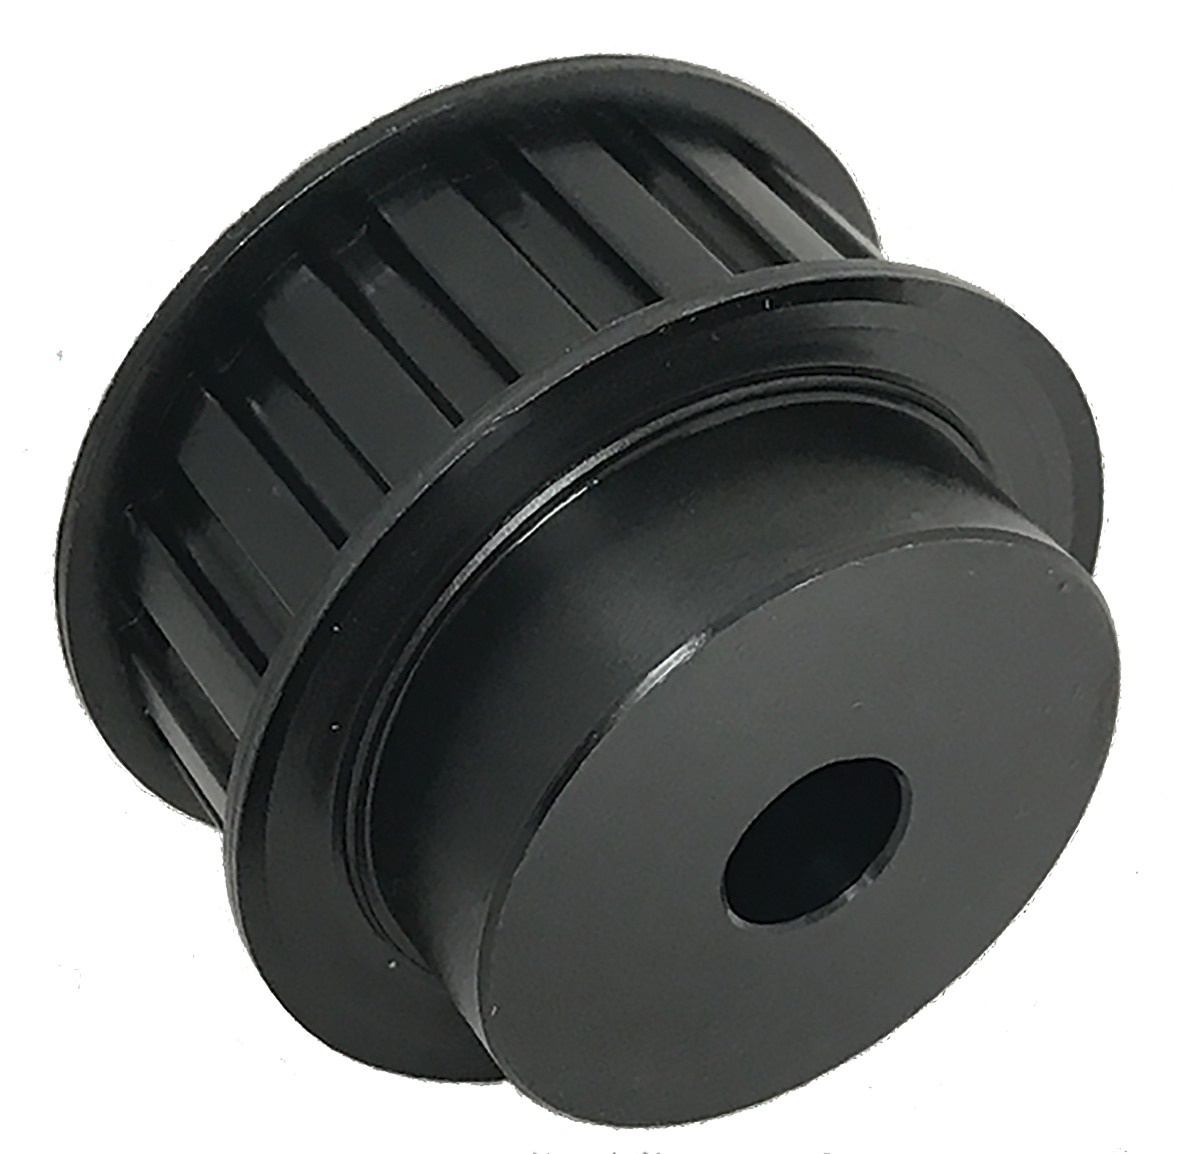 17H200-6FS8 - Steel Imperial Pitch Pulleys